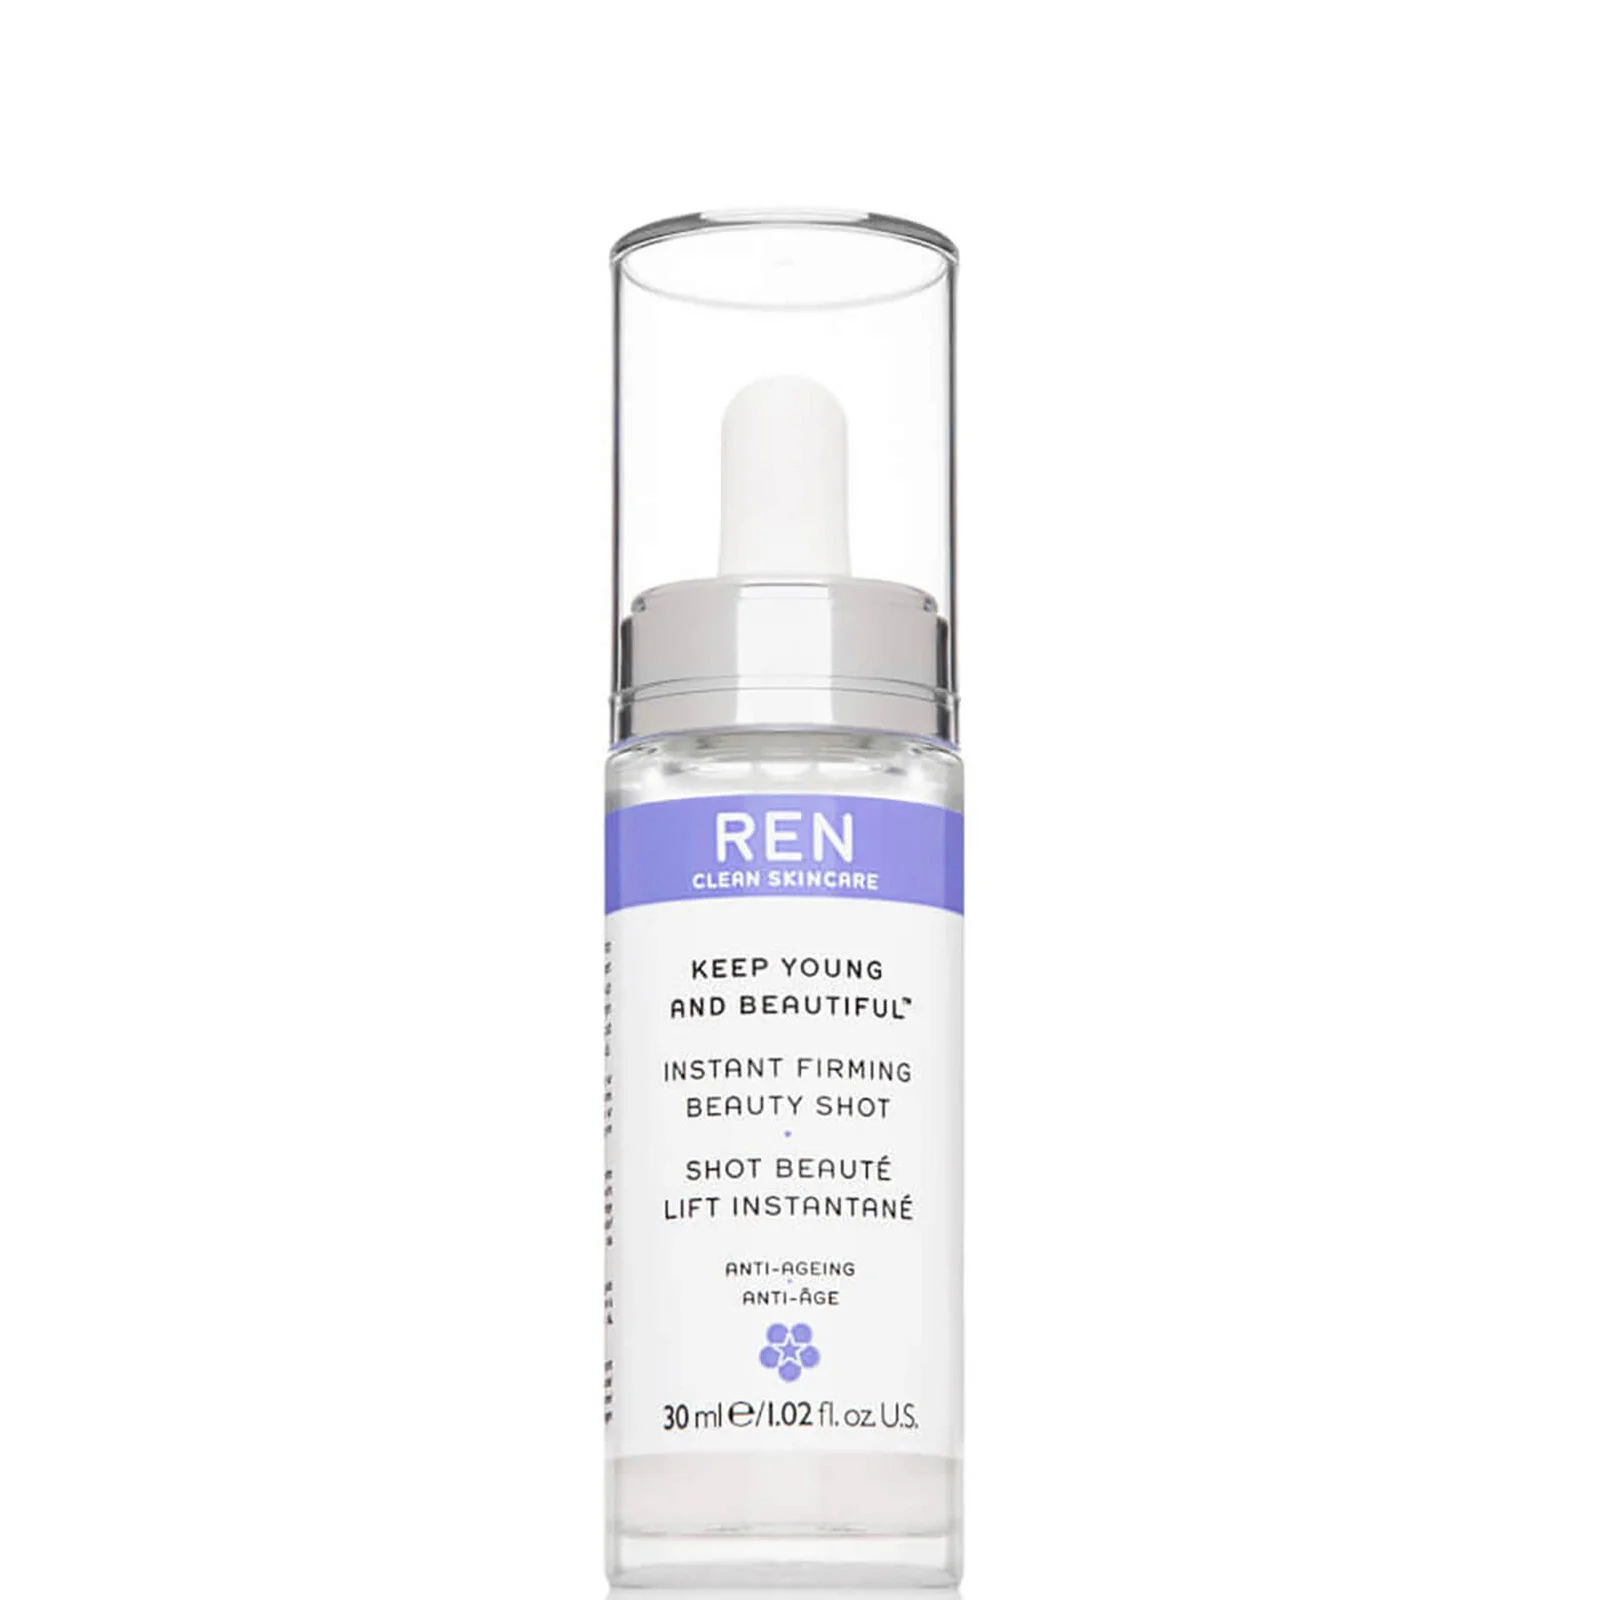 REN Clean Skincare Keep Young and Beautiful Instant Firming Beauty Shot 30ml Image 1